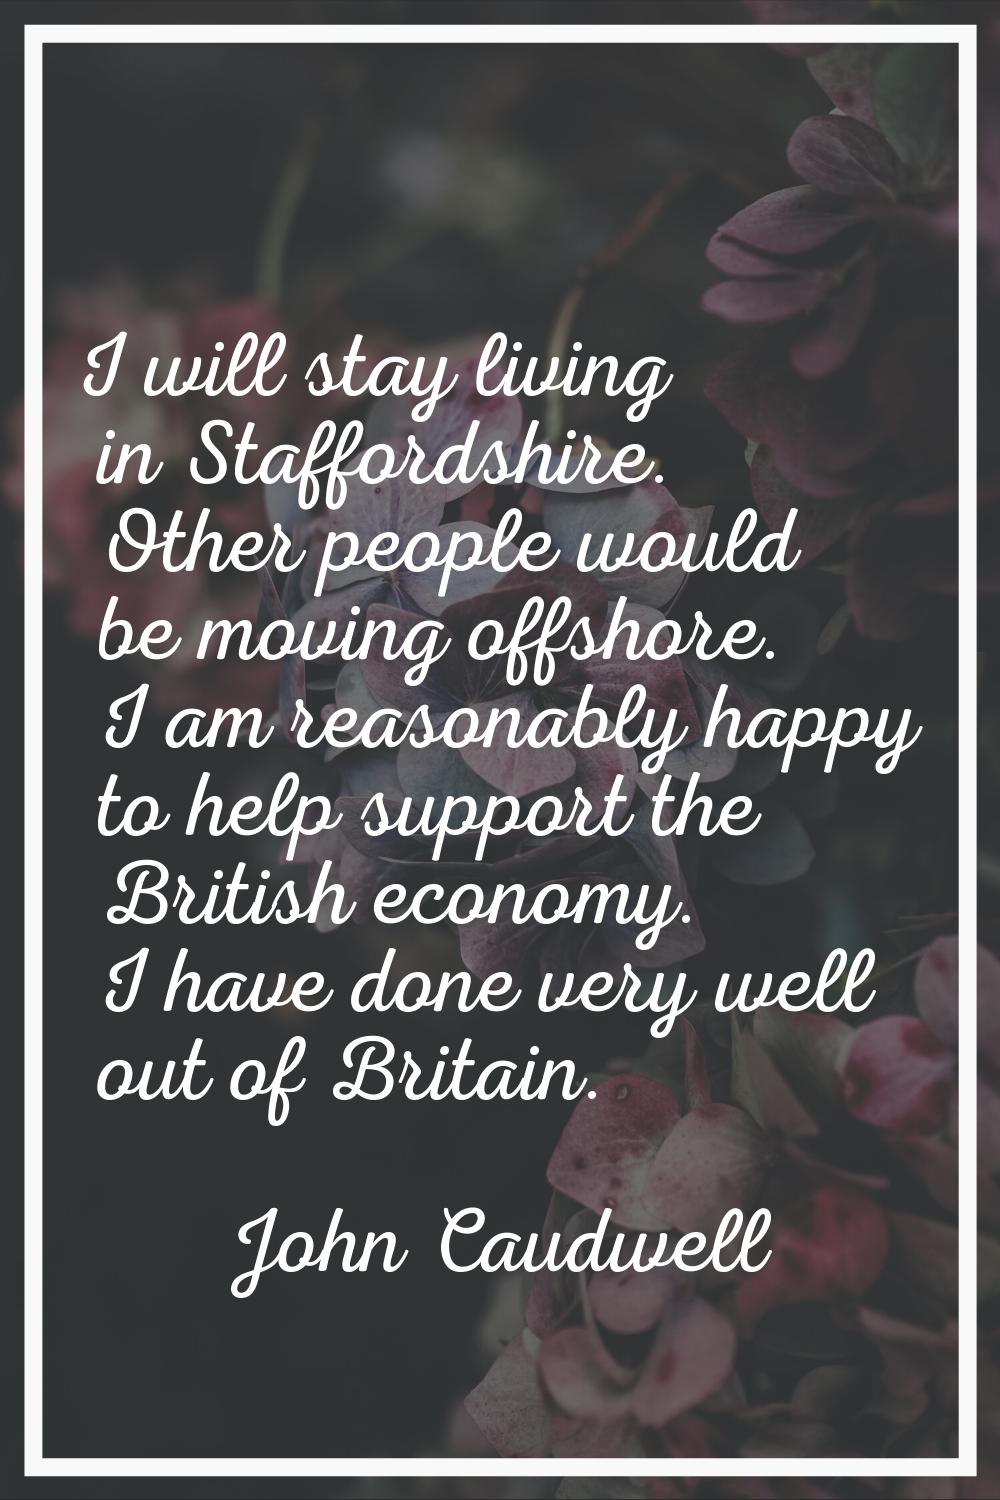 I will stay living in Staffordshire. Other people would be moving offshore. I am reasonably happy t